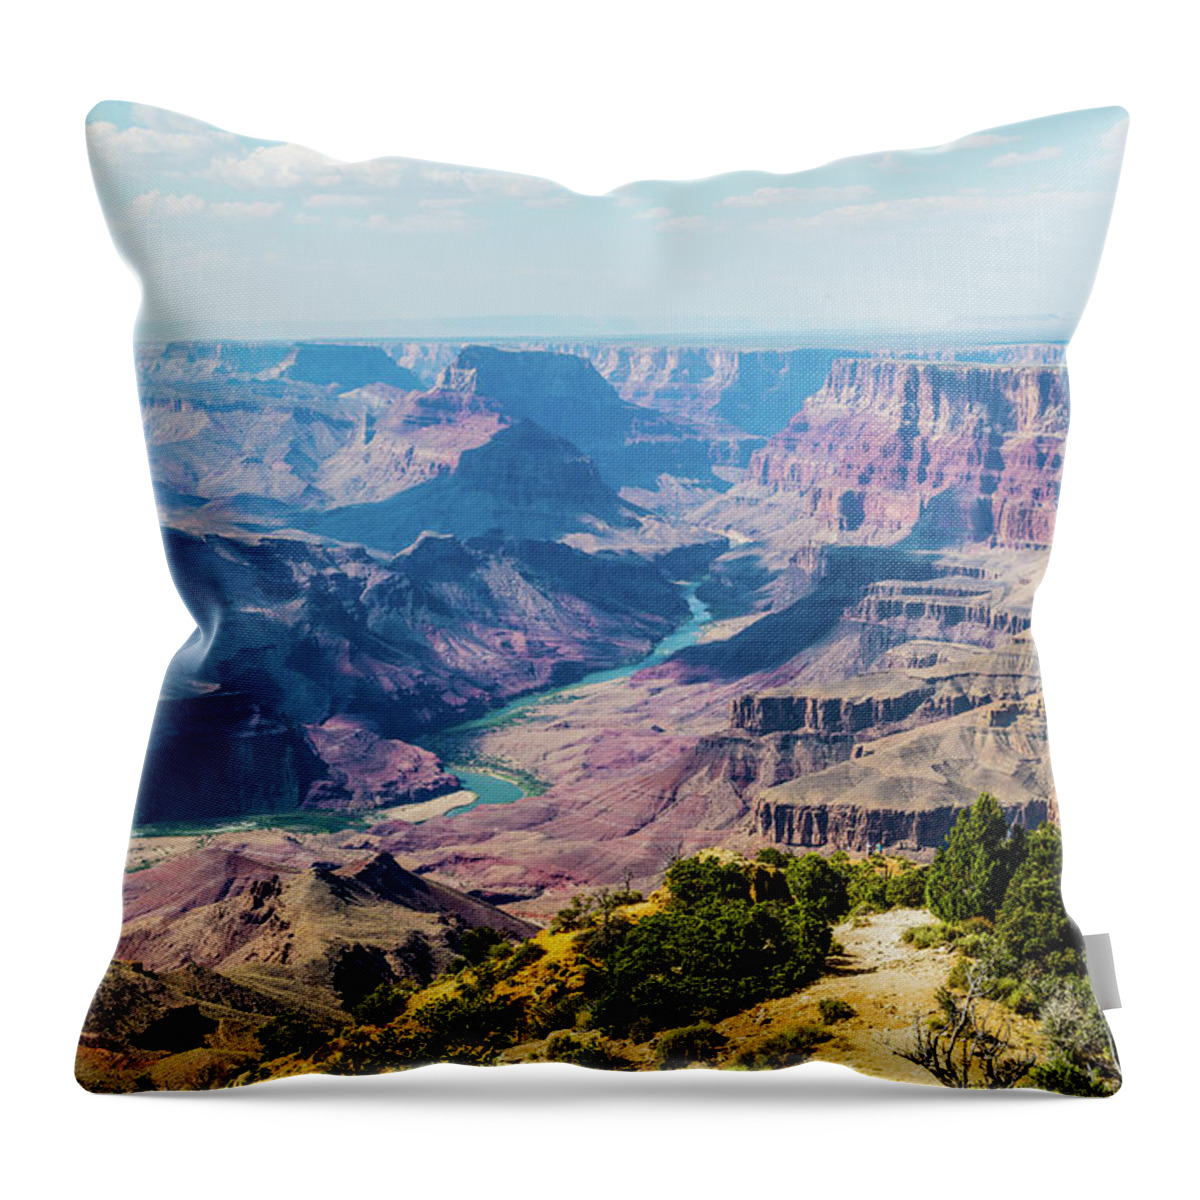 Landscape Throw Pillow featuring the photograph Grand canyon - West Village by Hisao Mogi